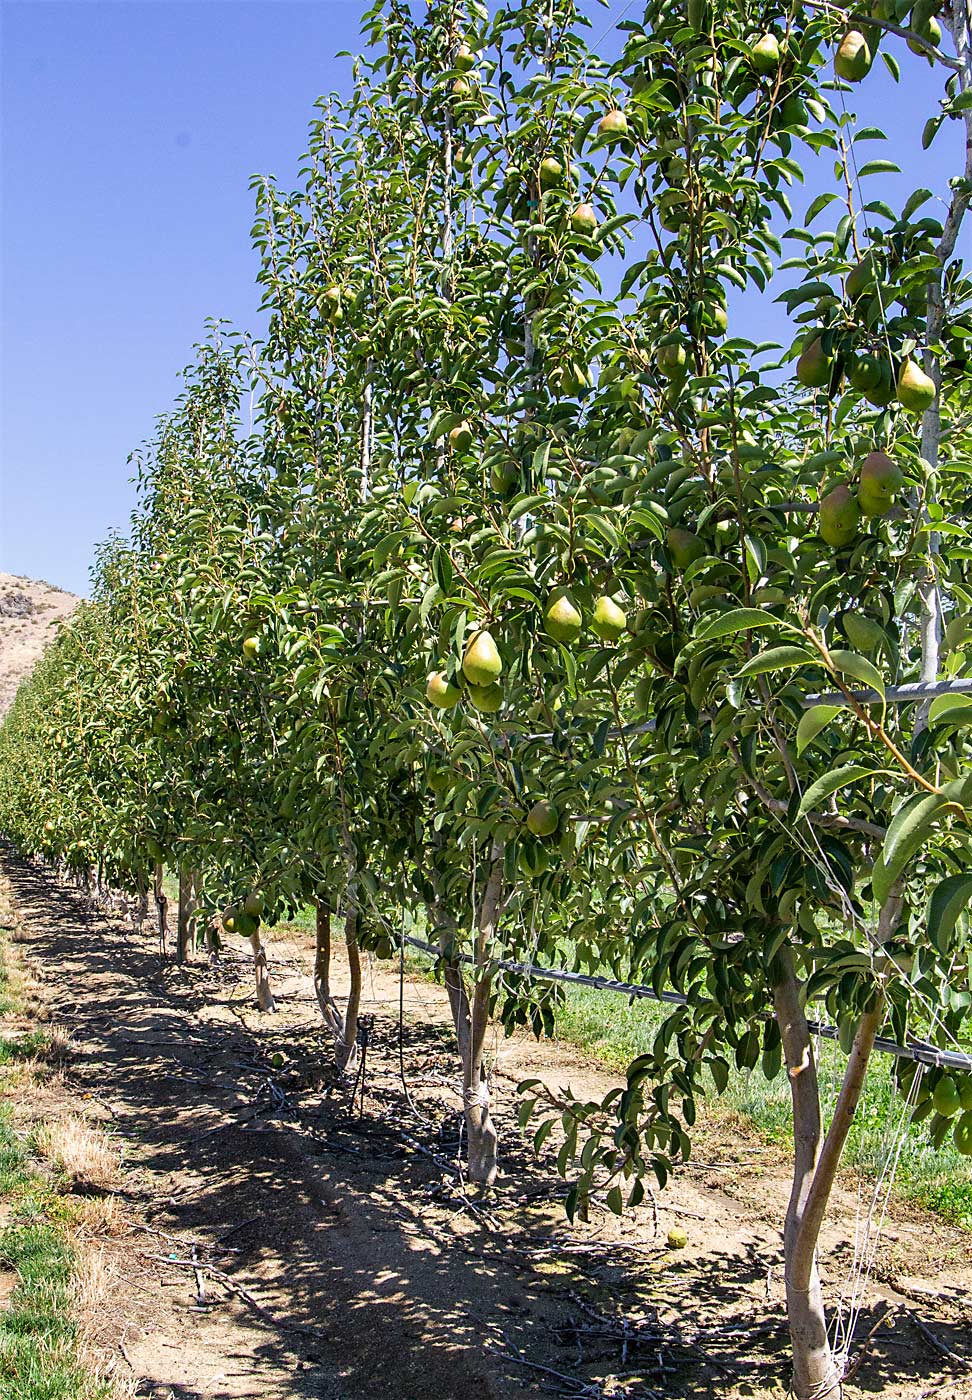 By training Bartlett pears on a two-leader system, growers can plant at higher density on standard rootstocks, such as this experimental Stemilt Growers block near Chelan Falls, planted on OHxF 97 that spaces a leader every 3 feet. But while it may look like an apple block at 3 feet by 12 feet, the pruning and training for pears is quite different, said Stemilt area manager Bryan Mrachek. (Kate Prengaman/Good Fruit Grower.)